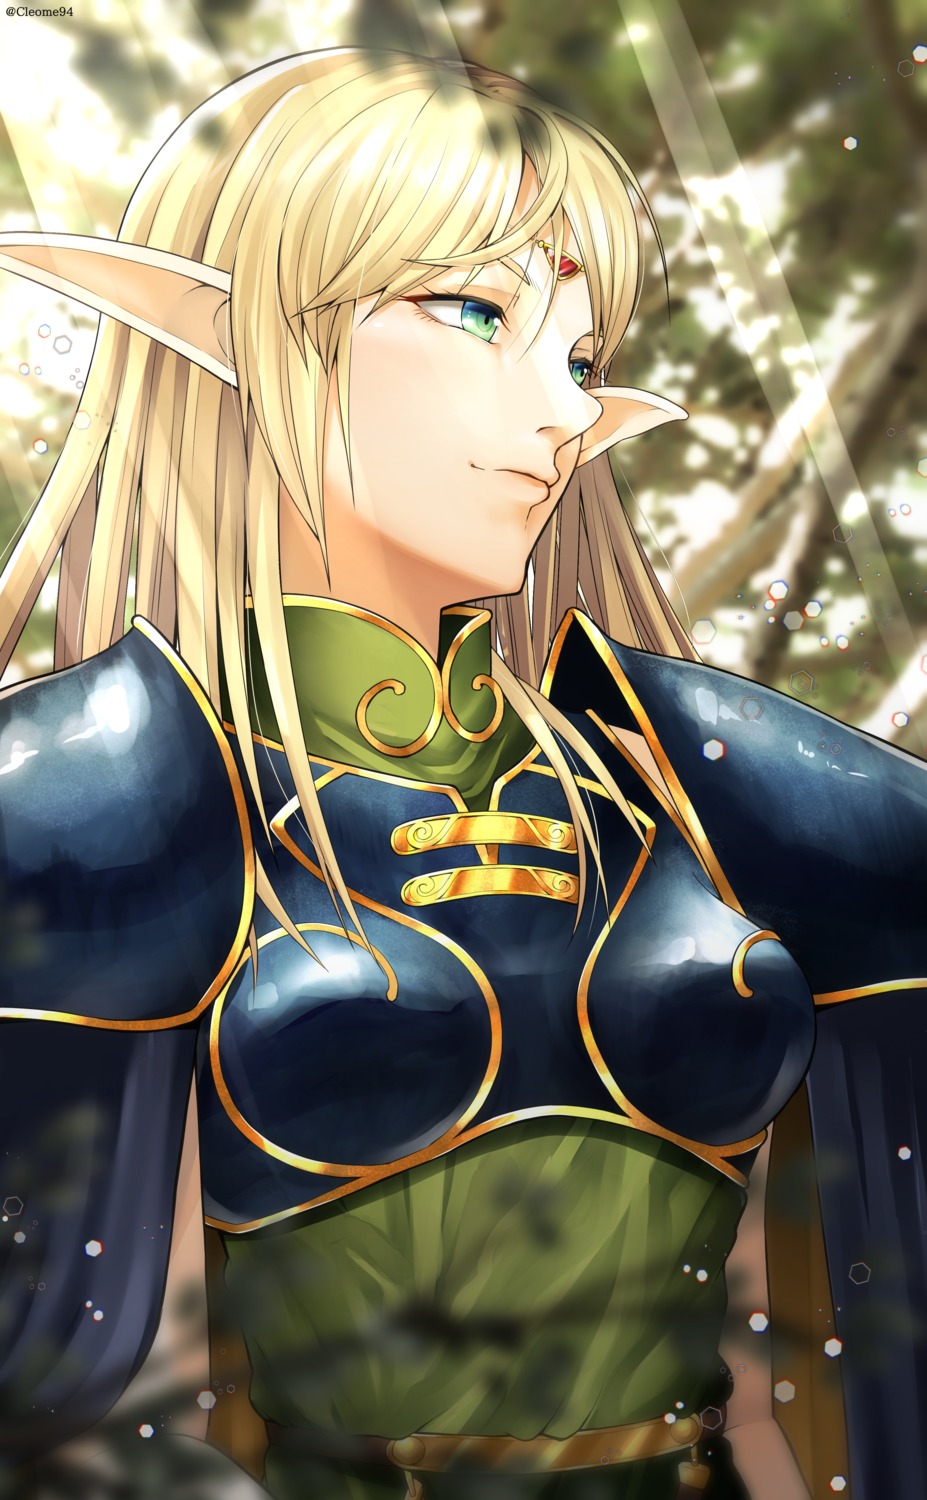 armor cleome94 deedlit pointy_ears record_of_lodoss_war